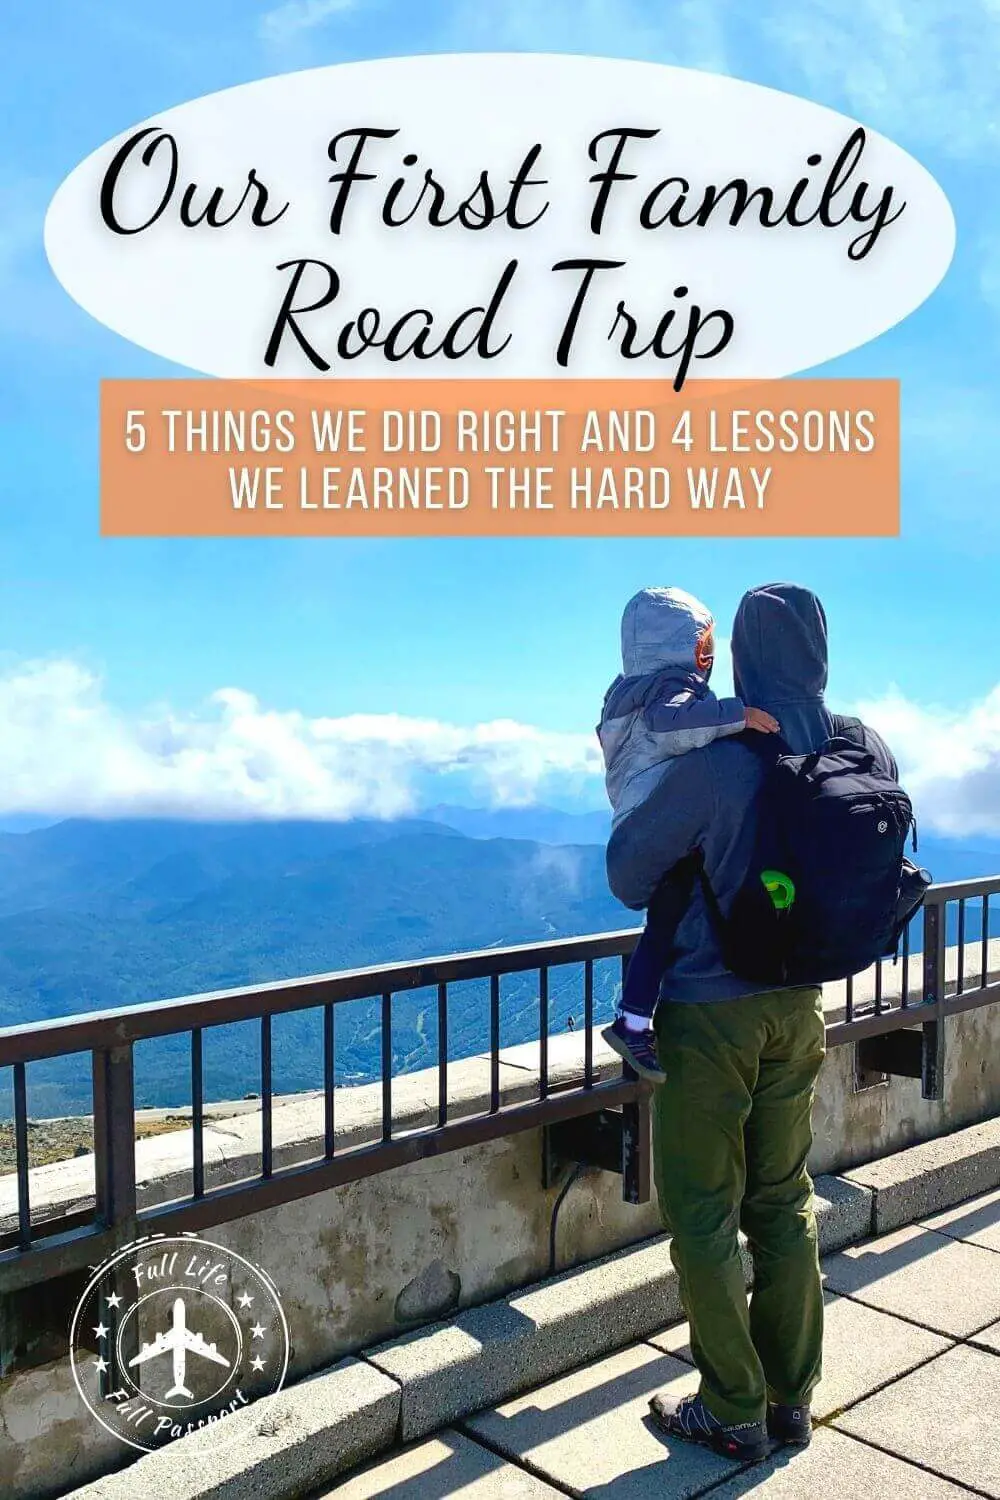 Our First Family Road Trip: 5 Things We Did Right and 4 Lessons We Learned the Hard Way